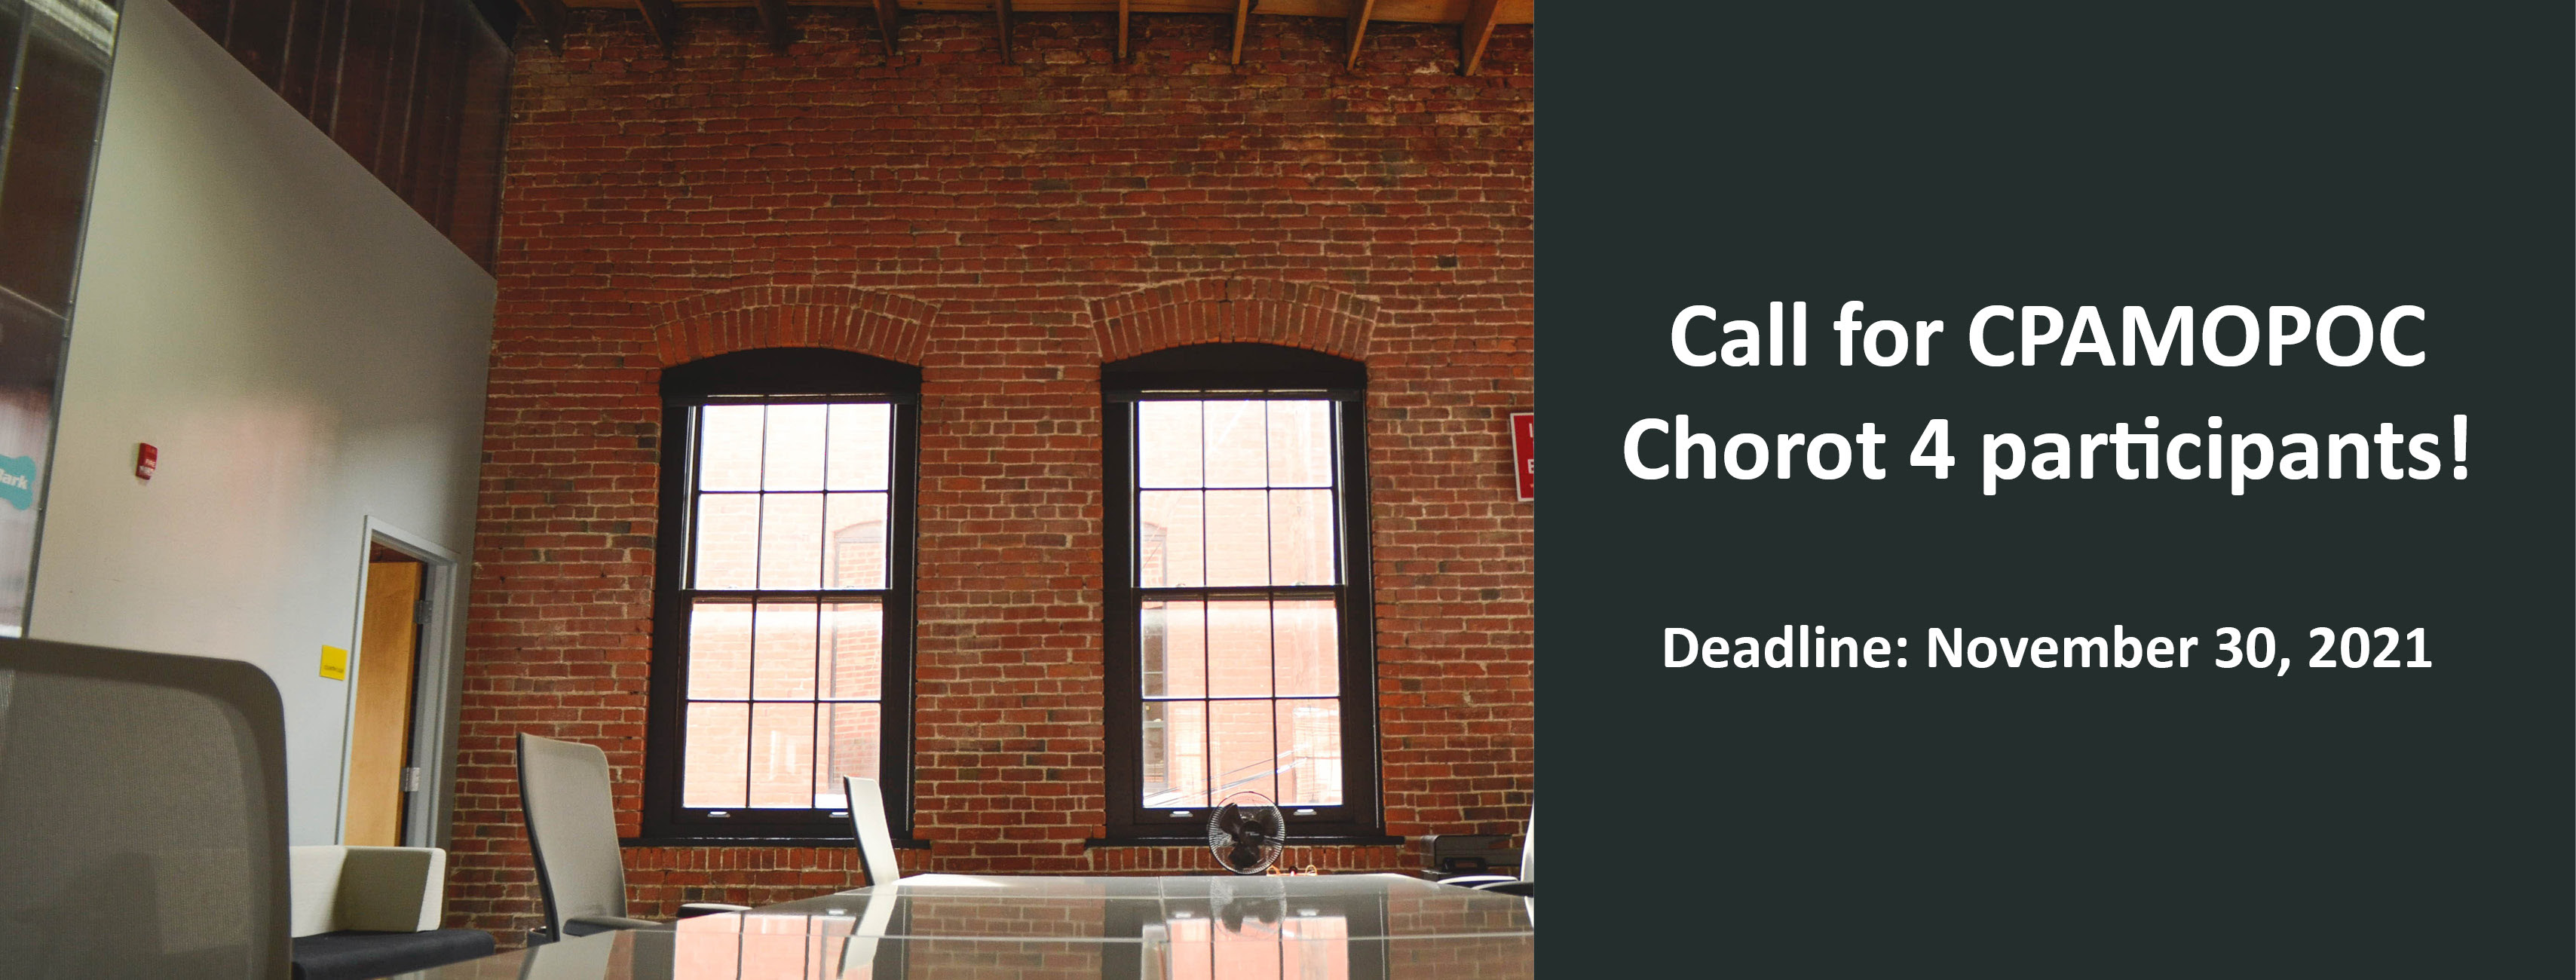 Office with brick walls and a table with chairs, on the right text, says Call for CPAMOPOC Chorot 4 participants!  Deadline: November 30, 2021